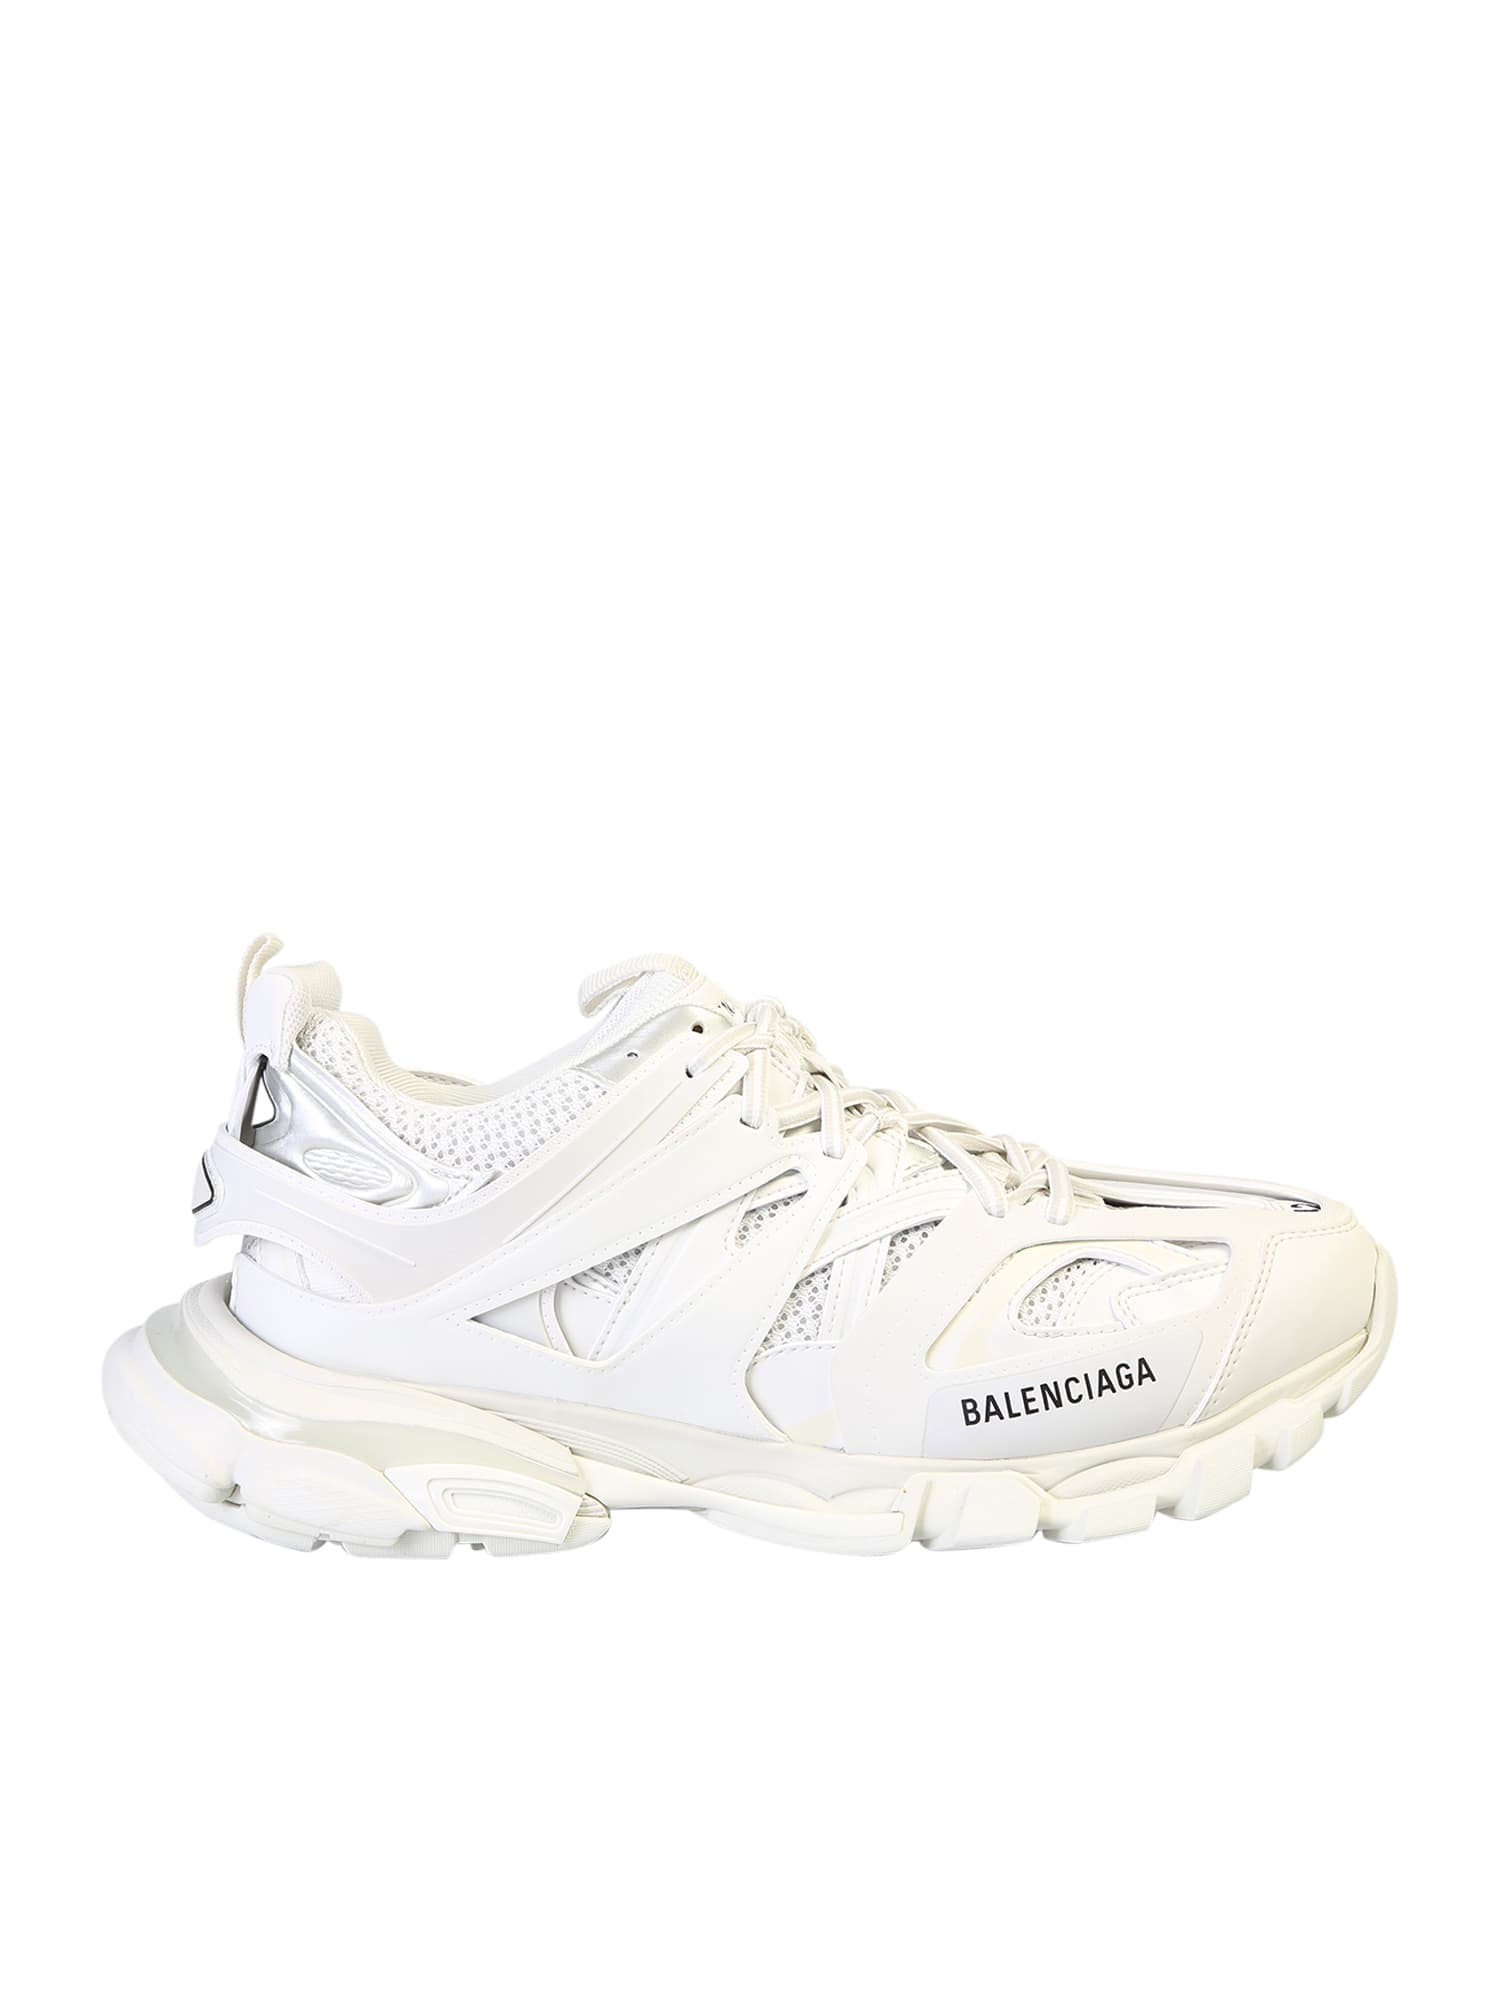 Balenciaga Mixed Media Leather Track Sneakers Products